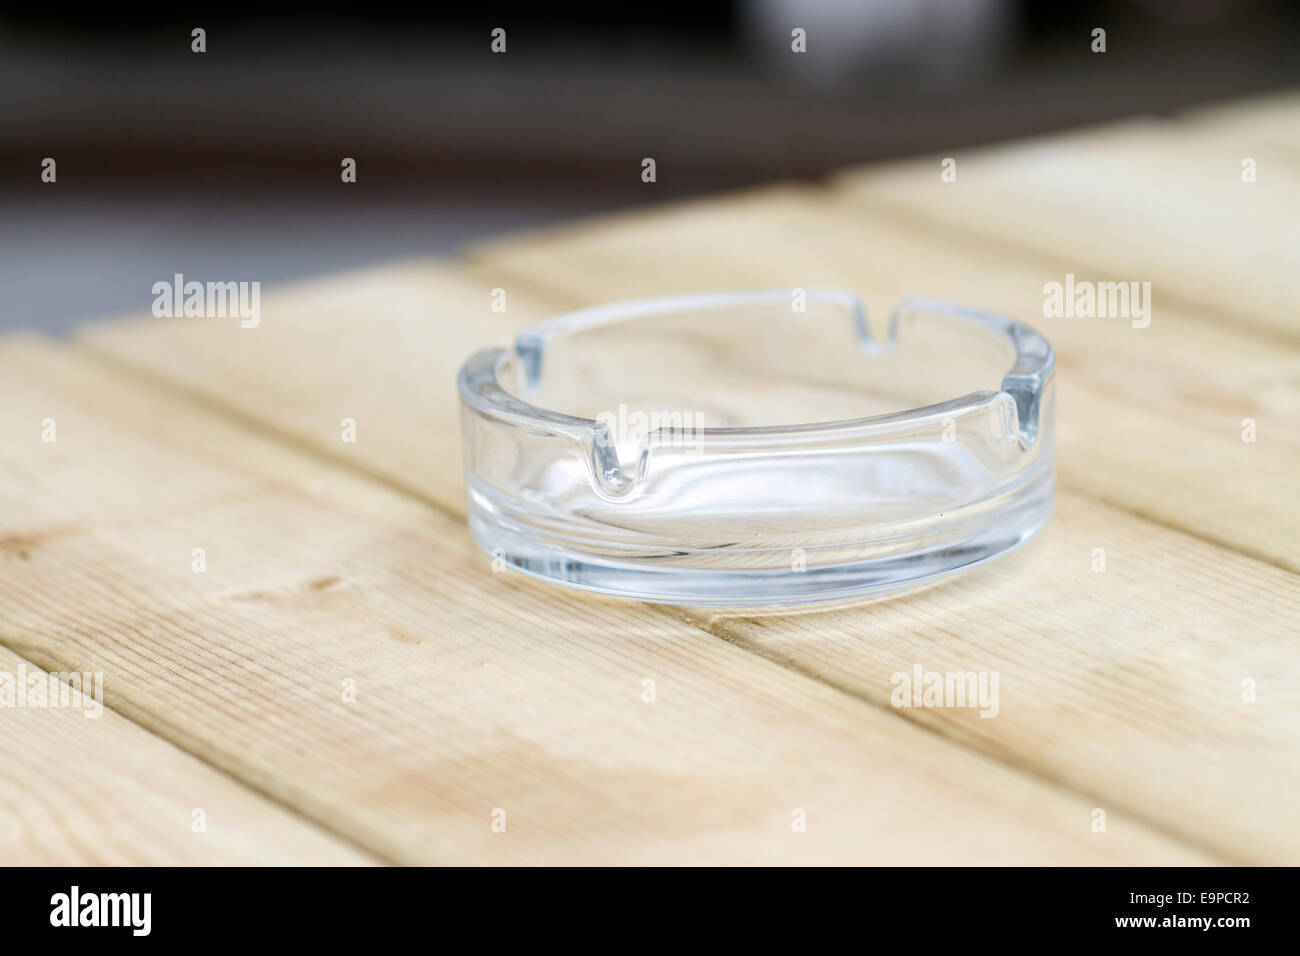 Ashtray on a wooden table Stock Photo